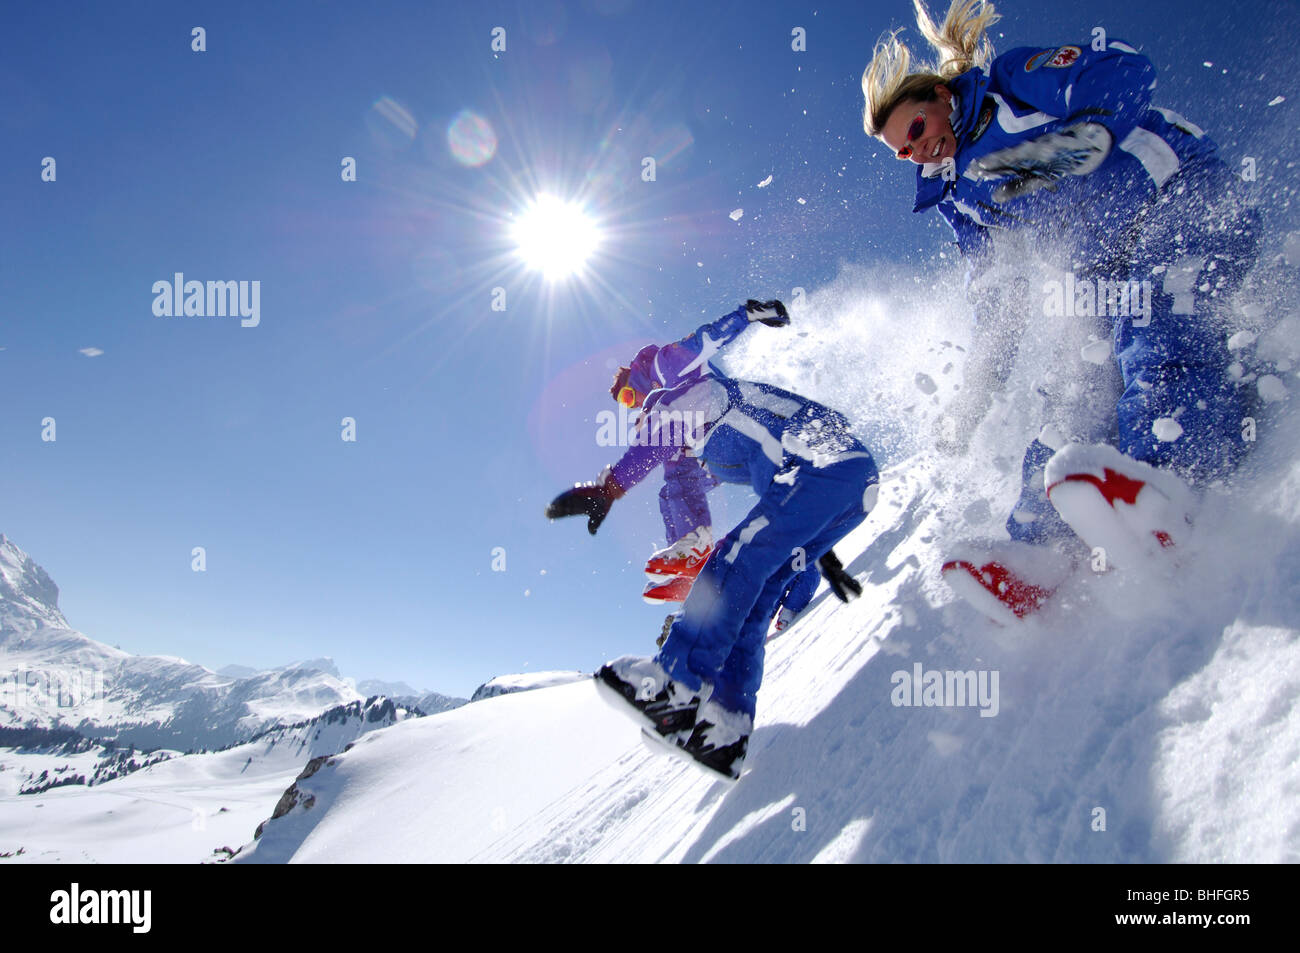 Two ski instructors jumping into fresh, powder snow, Mountain landscape in Winter, Seiser Alp, South Tyrol, Italy Stock Photo